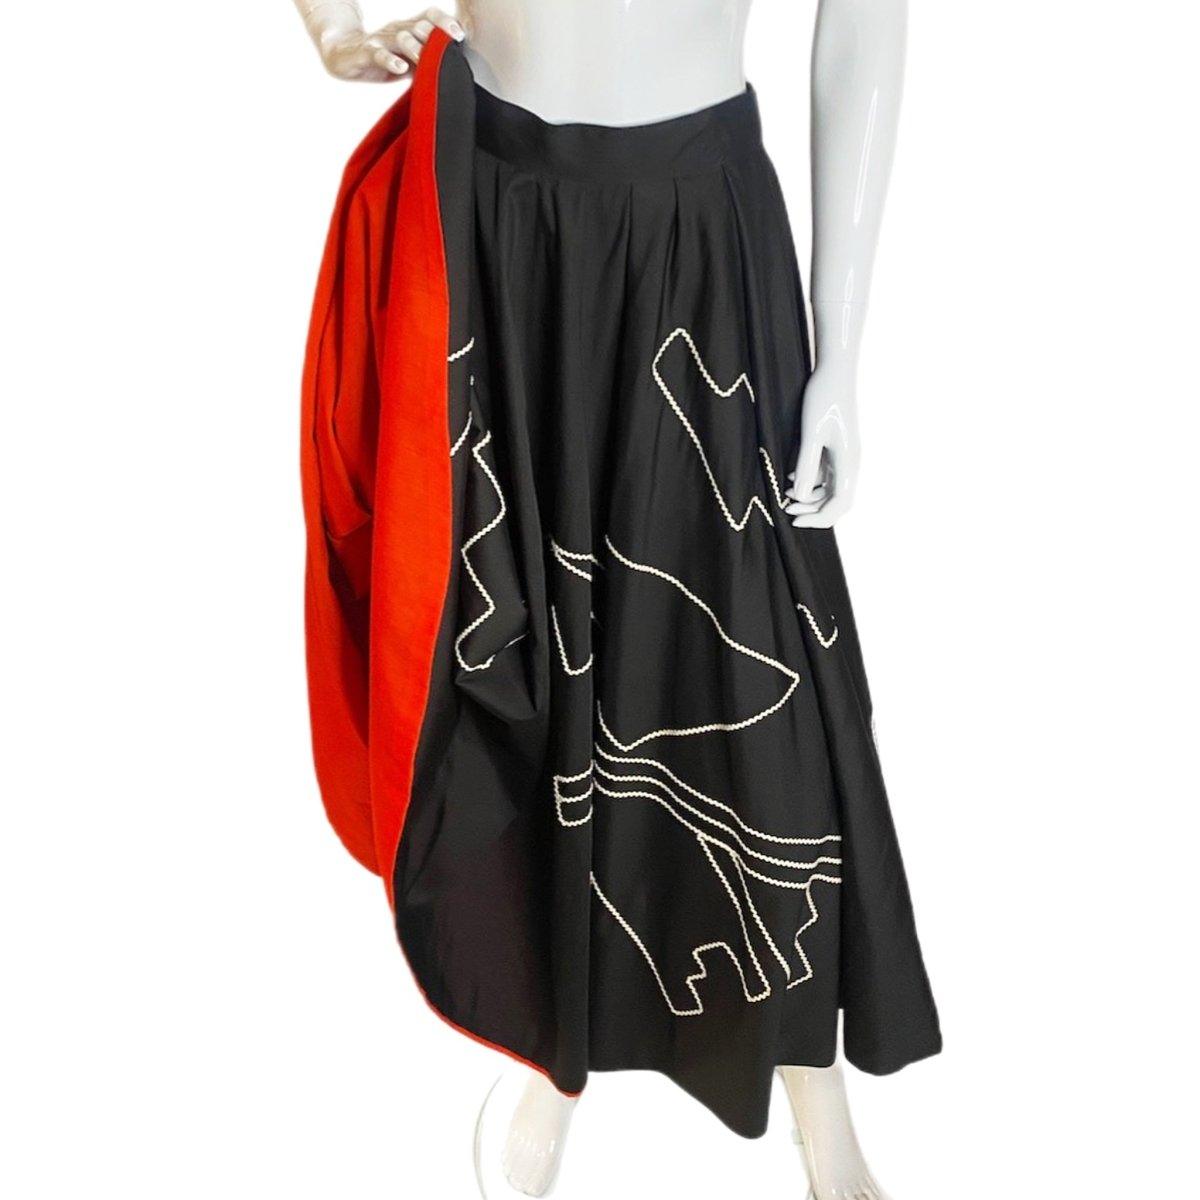 Vintage Circle Skirt with Rick Rack Shapes - Nataly Aponte